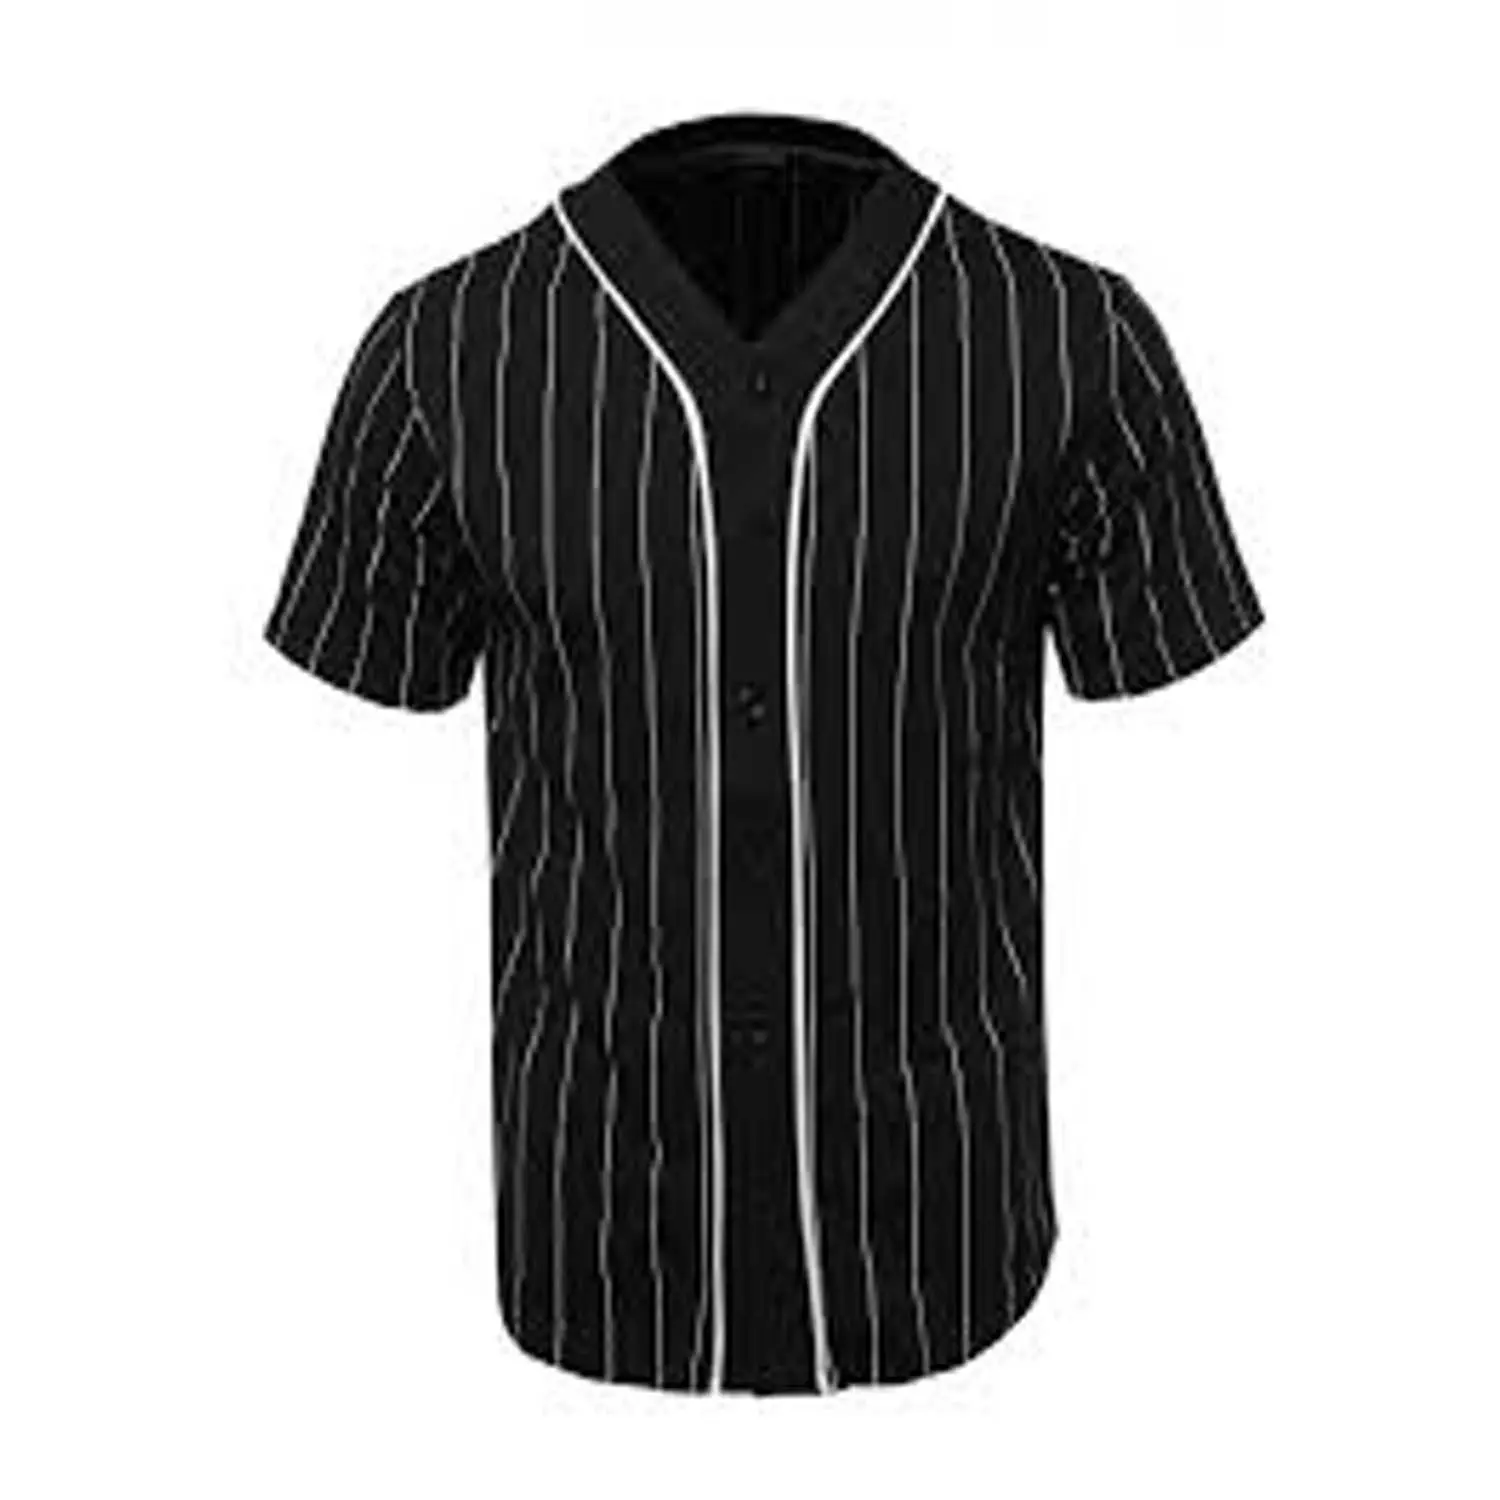 Latest design polyester material solid color breathable vintage baseball jersey